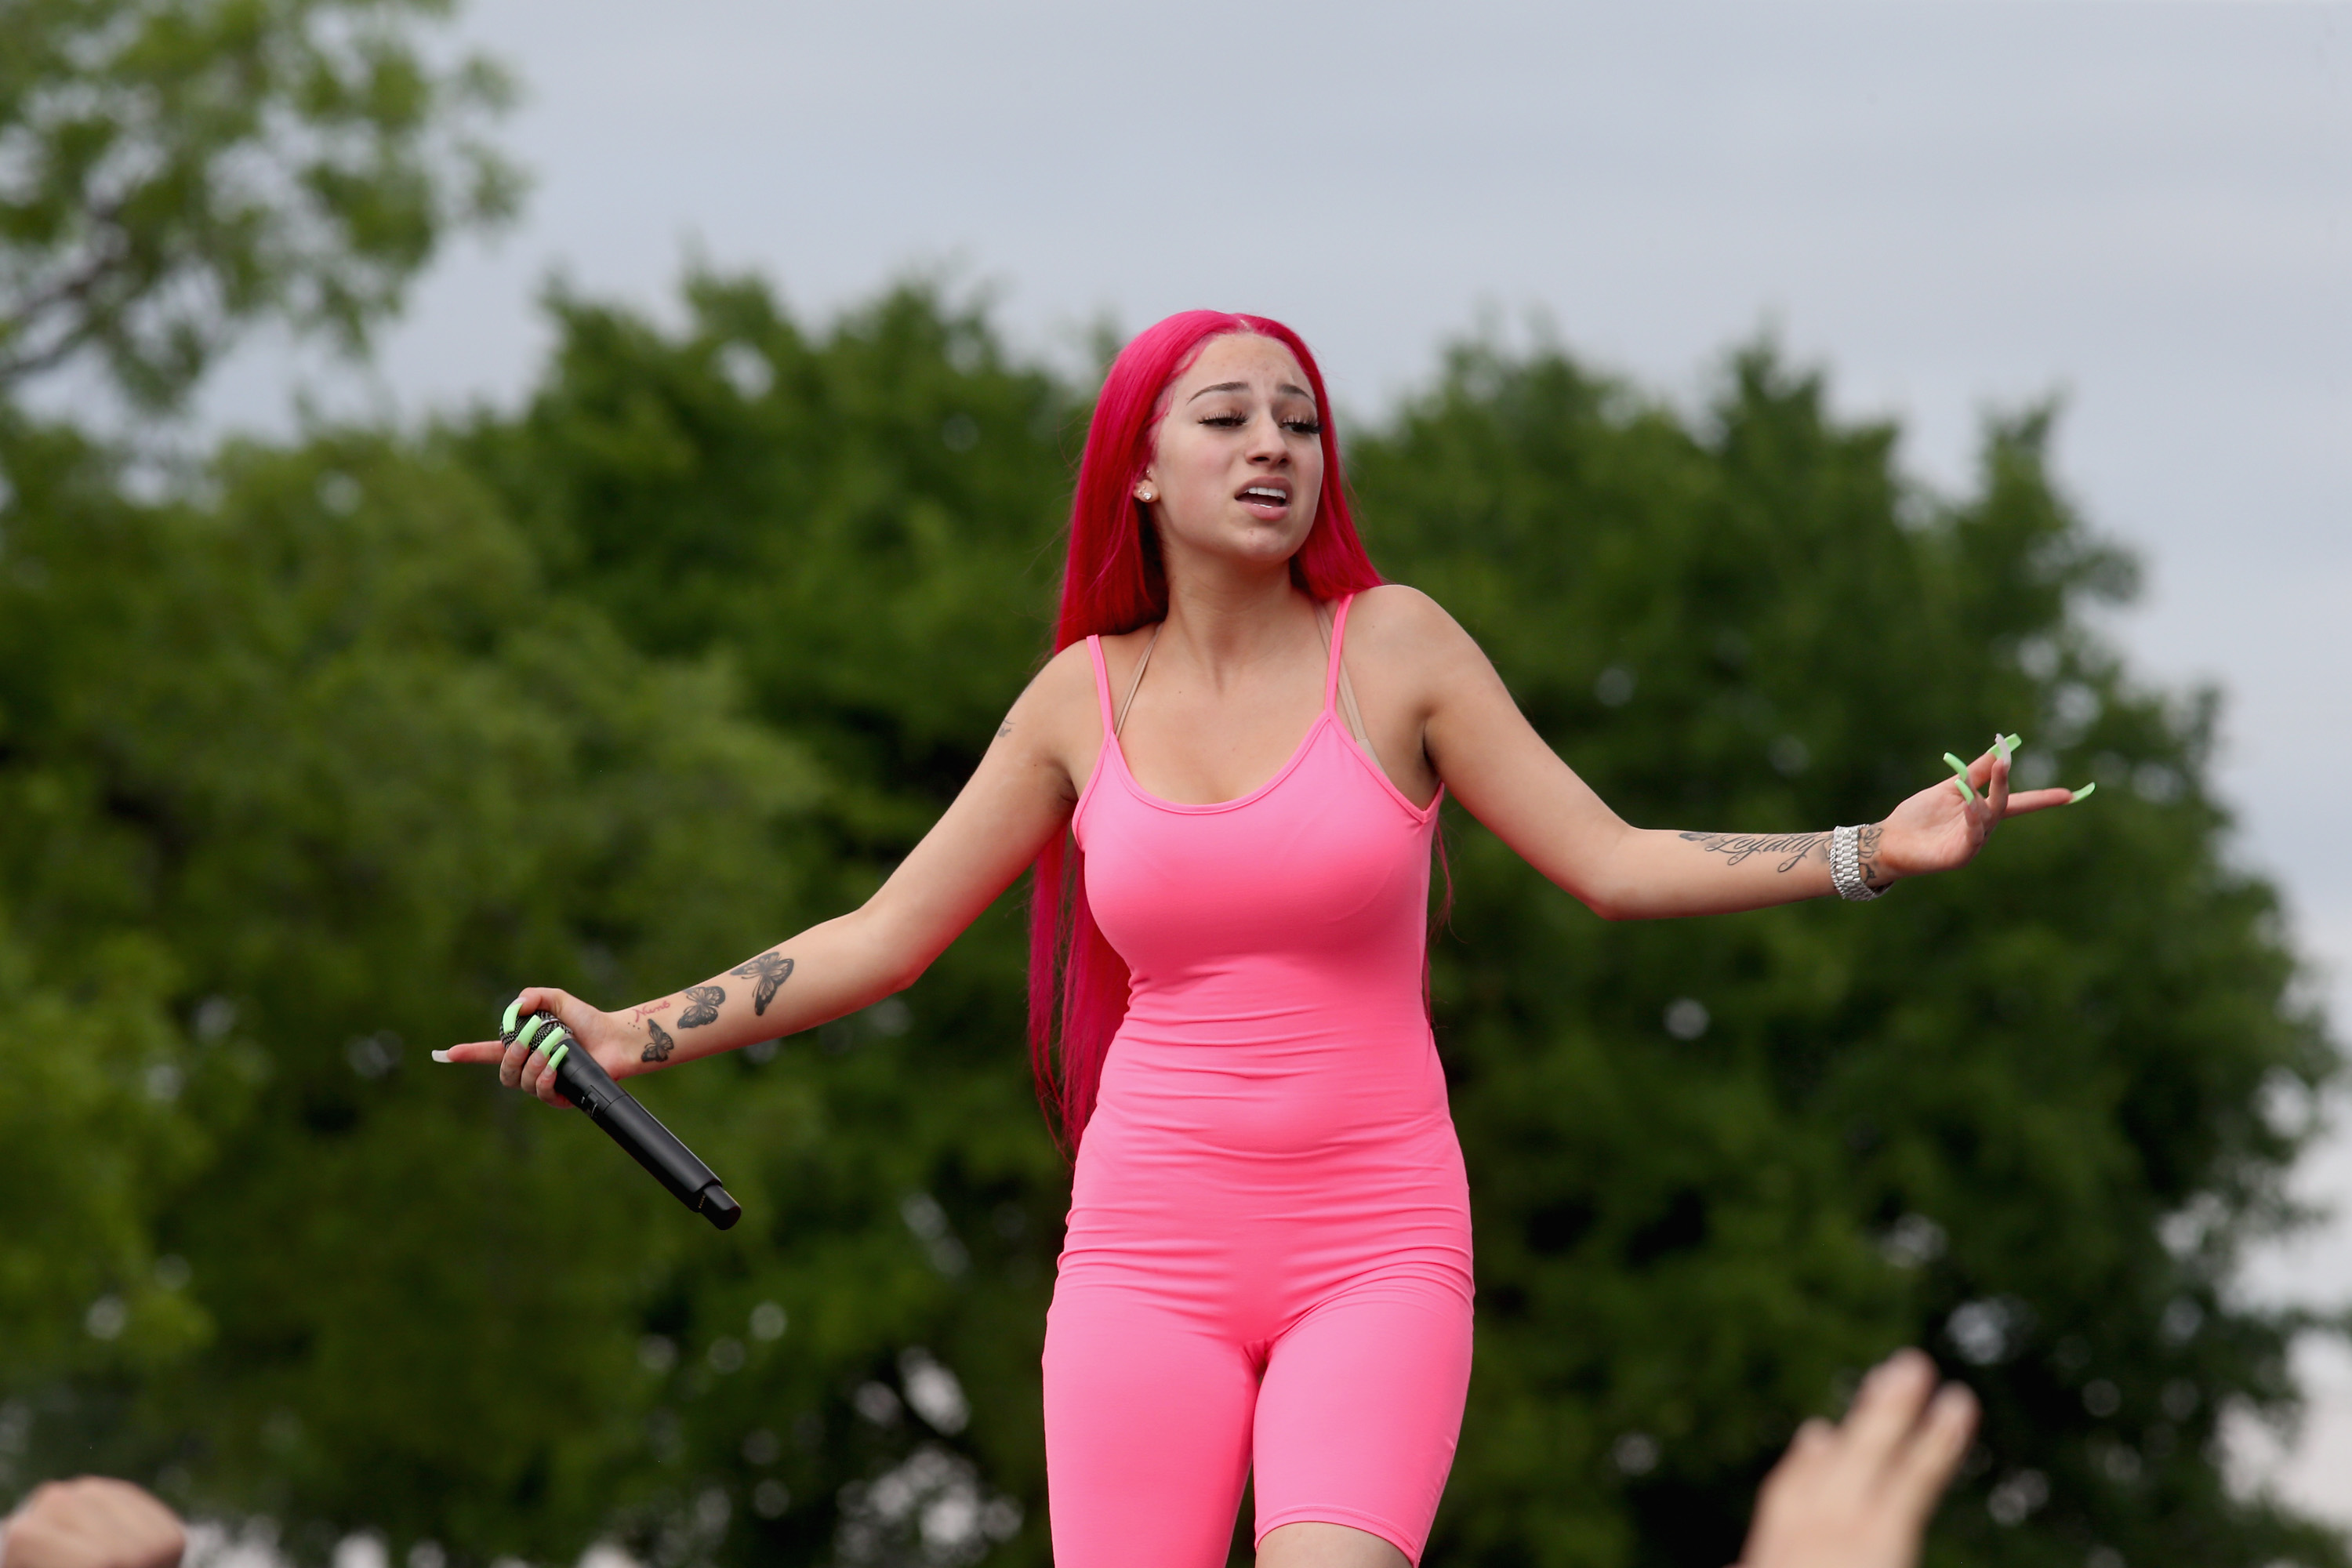 angelina catherine recommends cash me outside girl topless pic